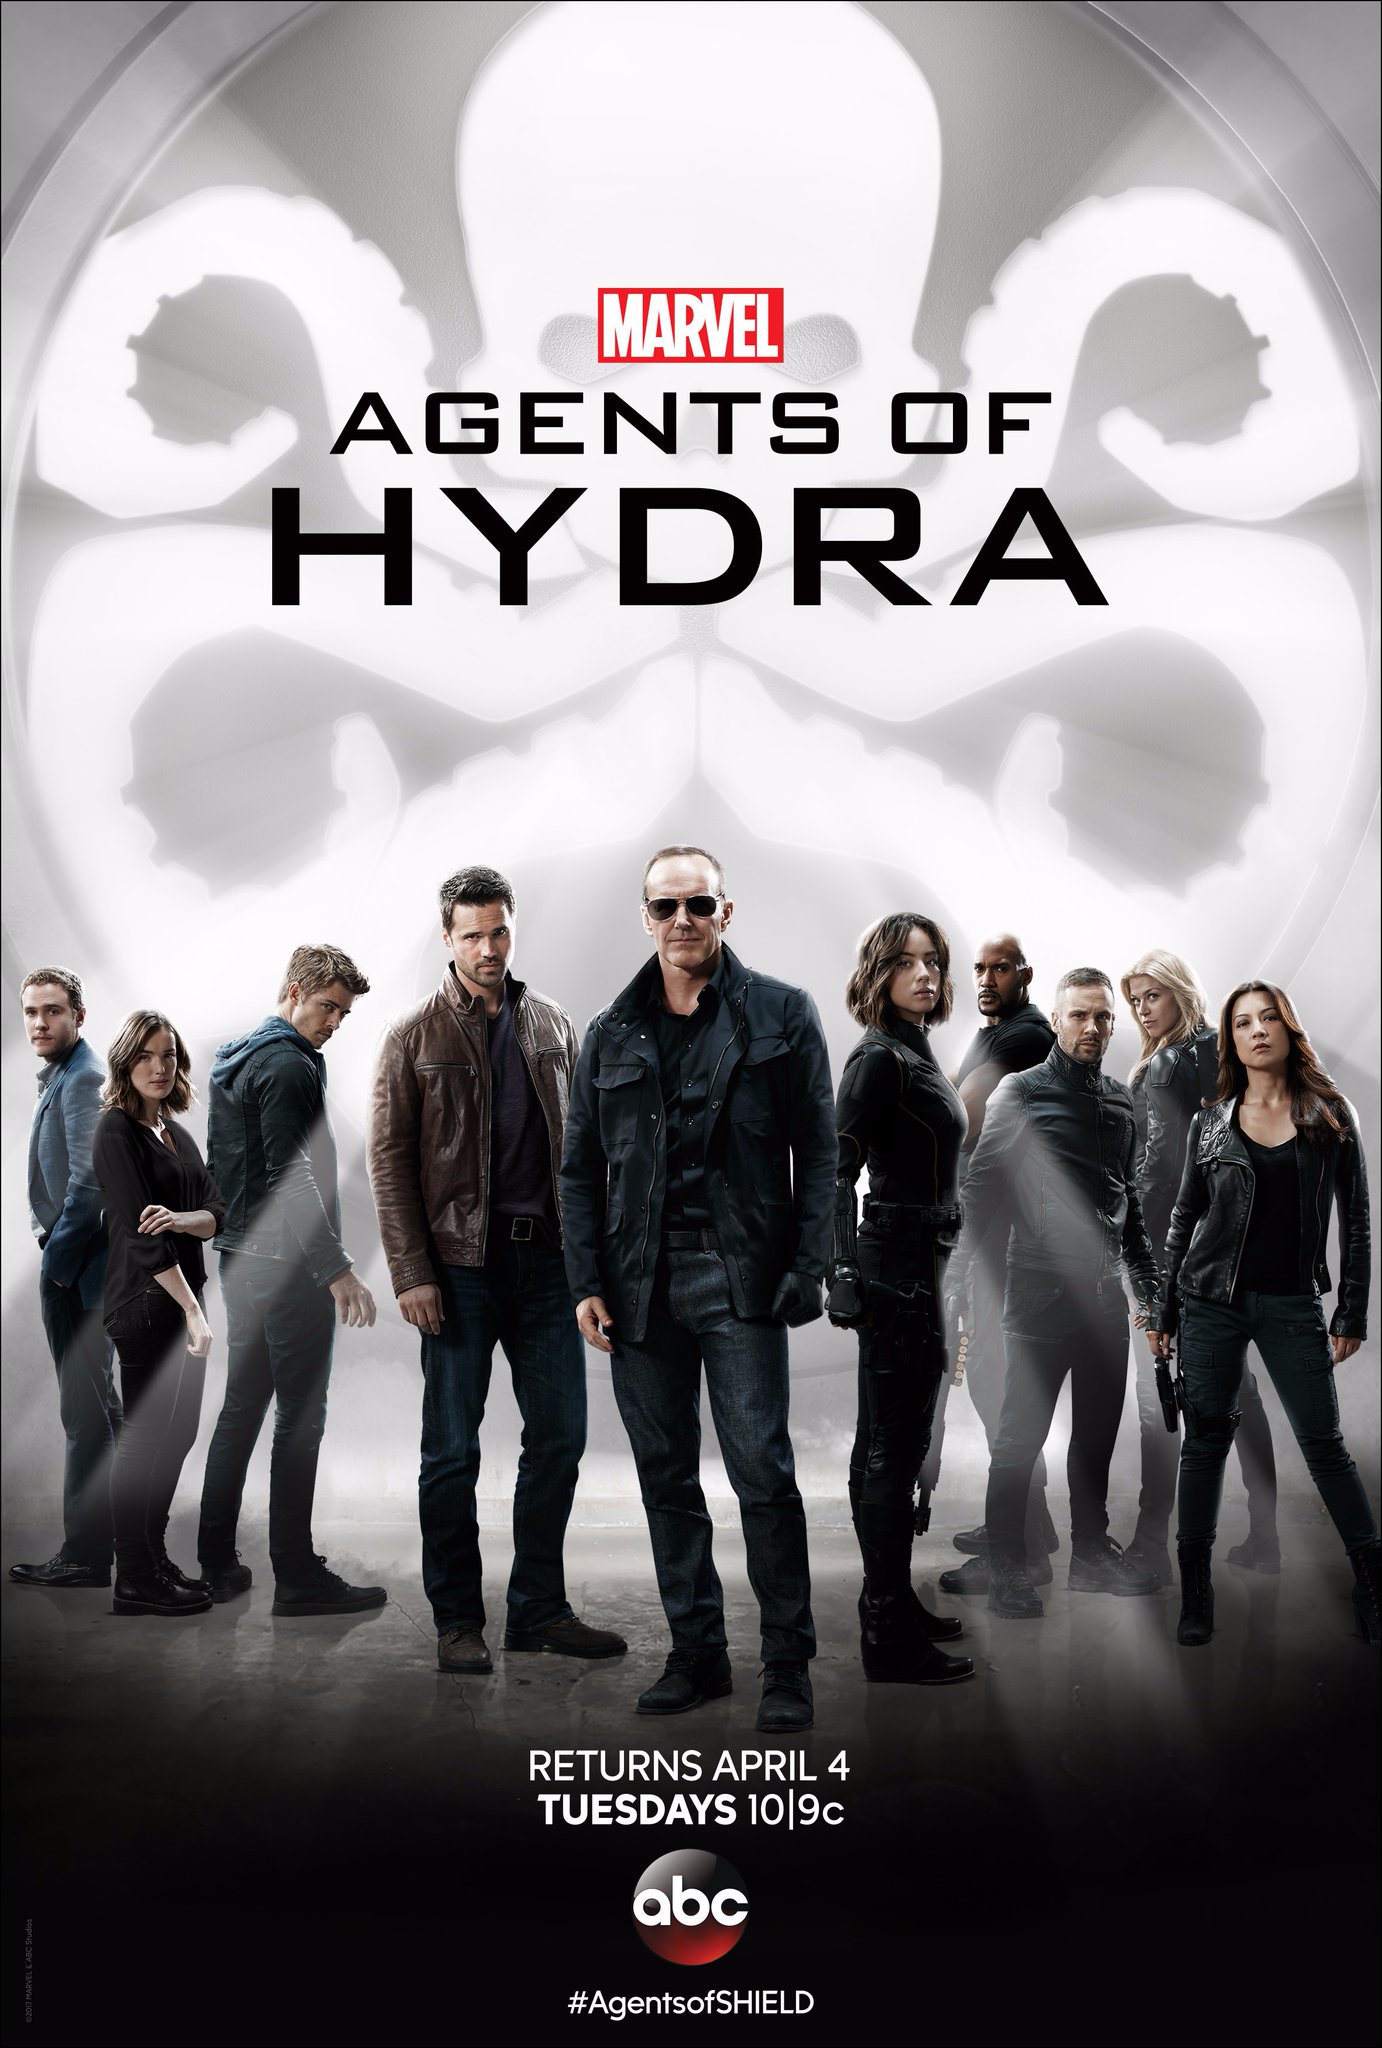 agents hydra 3 Agents of SHIELD Posters Tease Agents of HYDRA